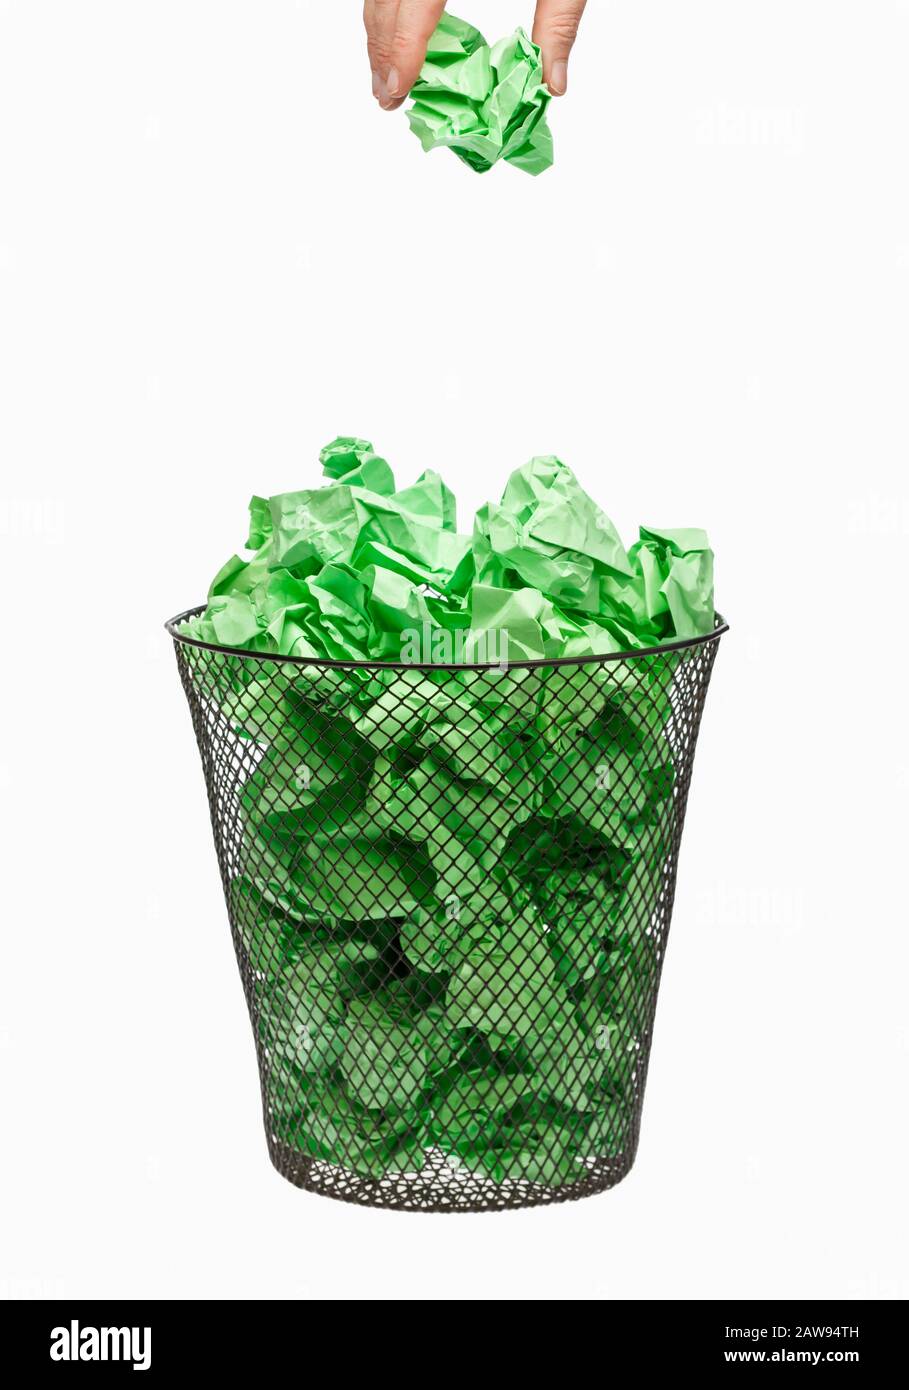 Hand recycling green waste paper dropping litter into a waste paper basket Stock Photo